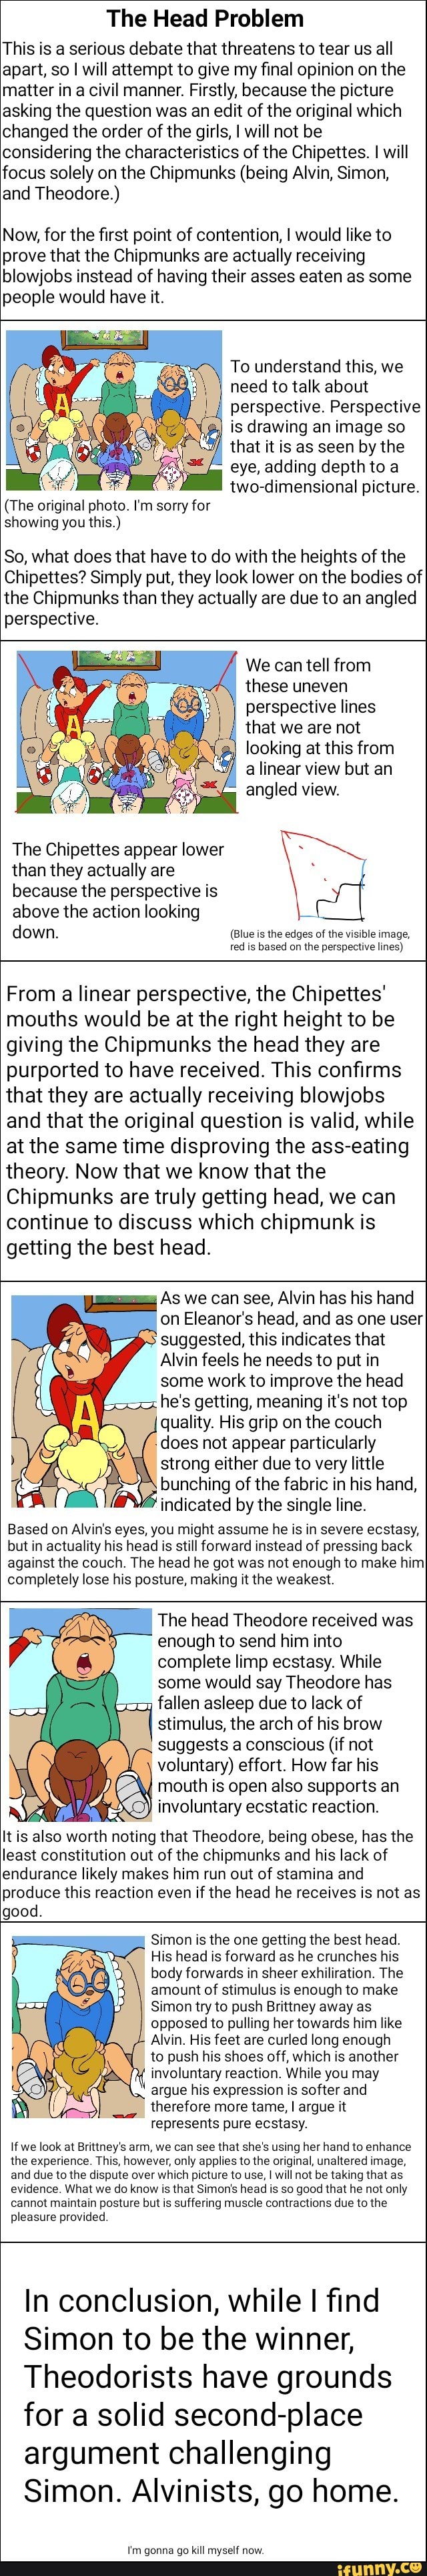 Alvin And The Chipmunks Porn Blowjob - The Head Problem This is a serious debate that threatens to ...